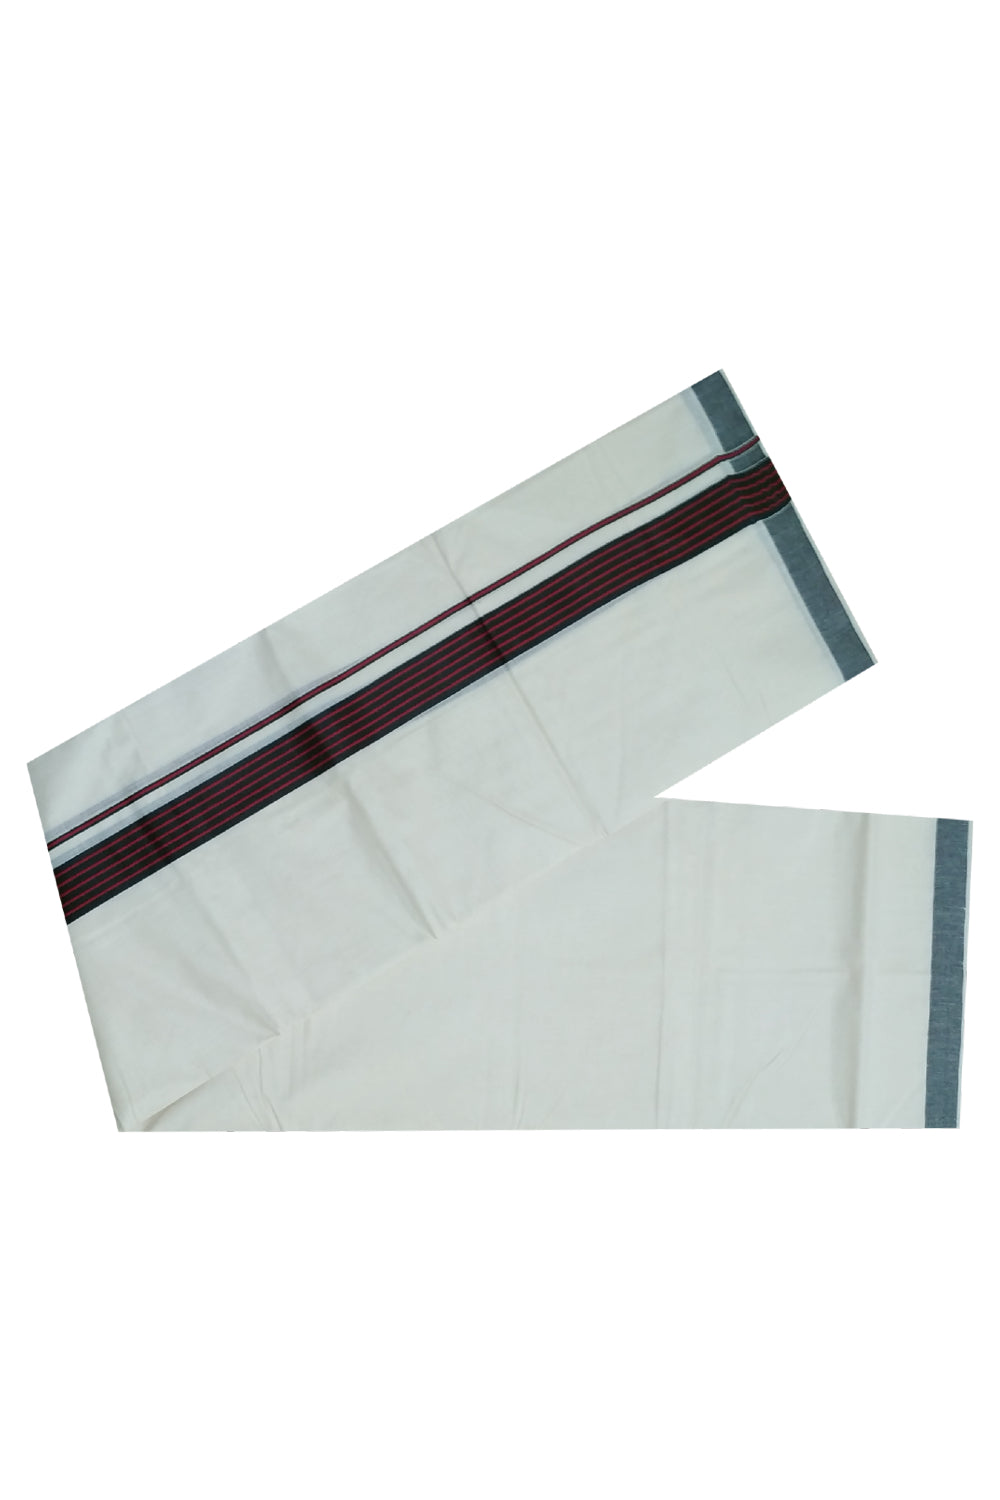 Off White Pure Cotton Mundu with Maroon lines on Black Border (South Indian Dhoti)